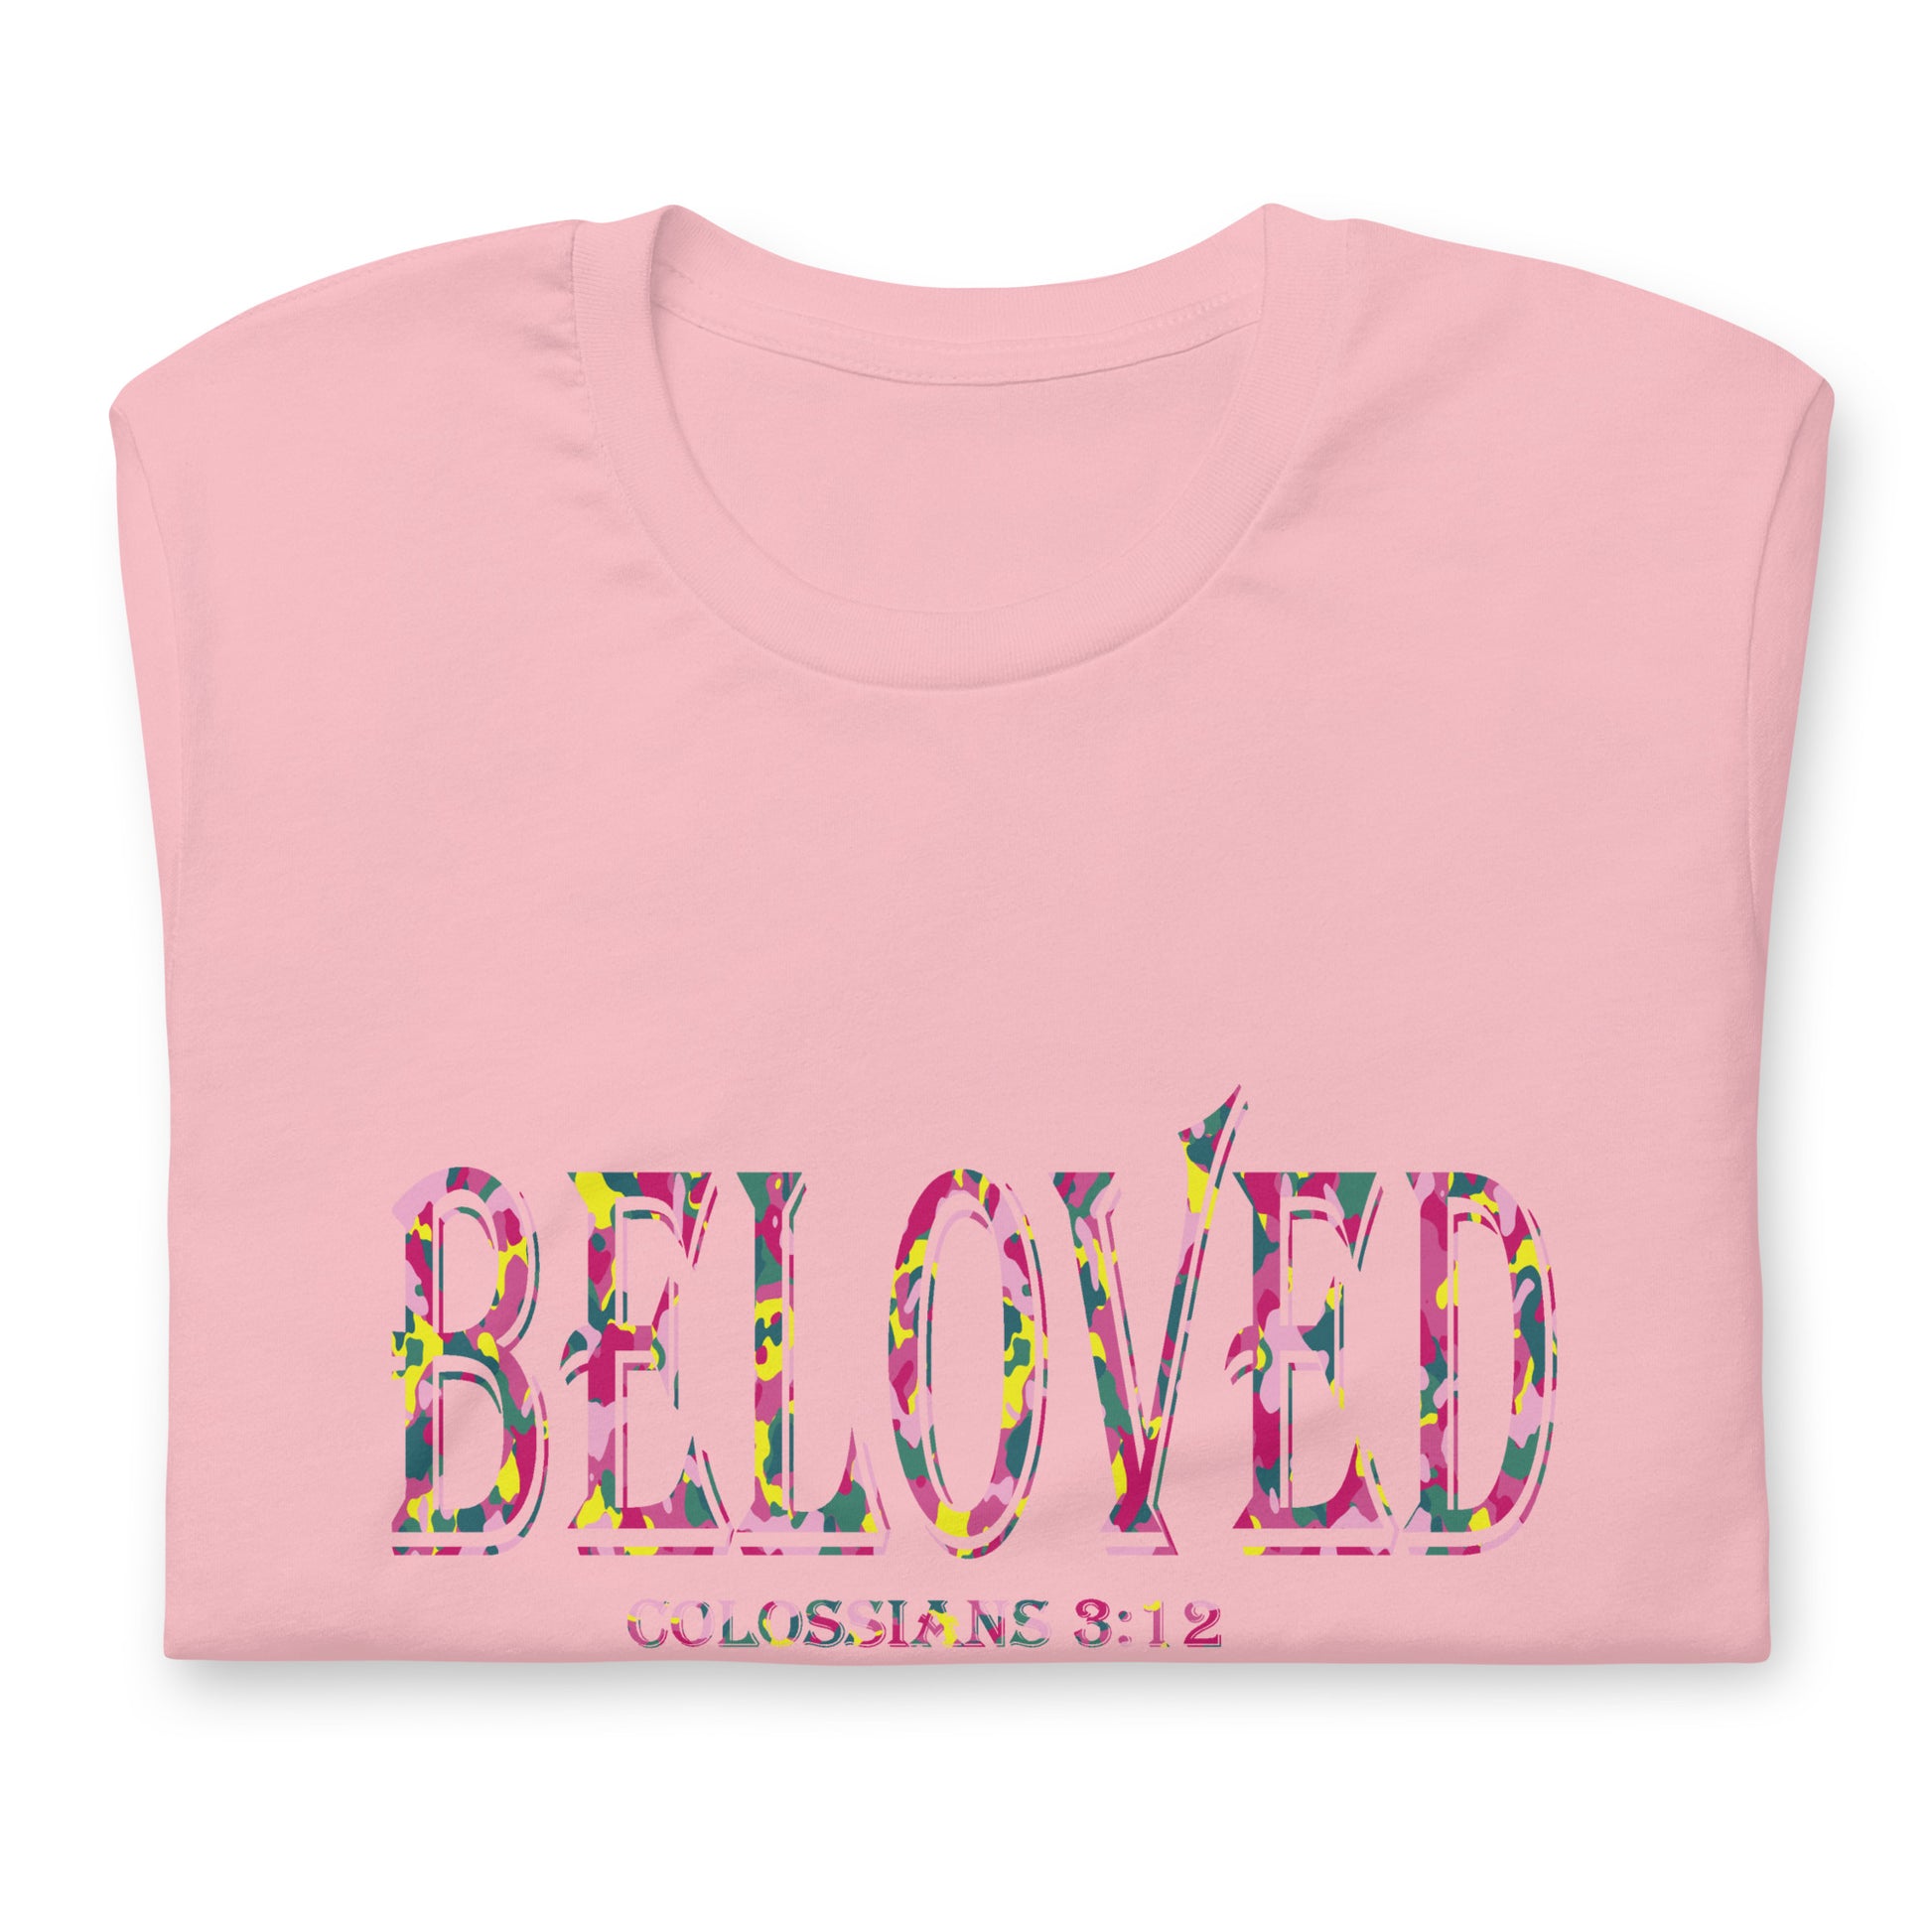 Colossians 3:12 Beloved T-shirt pink folded